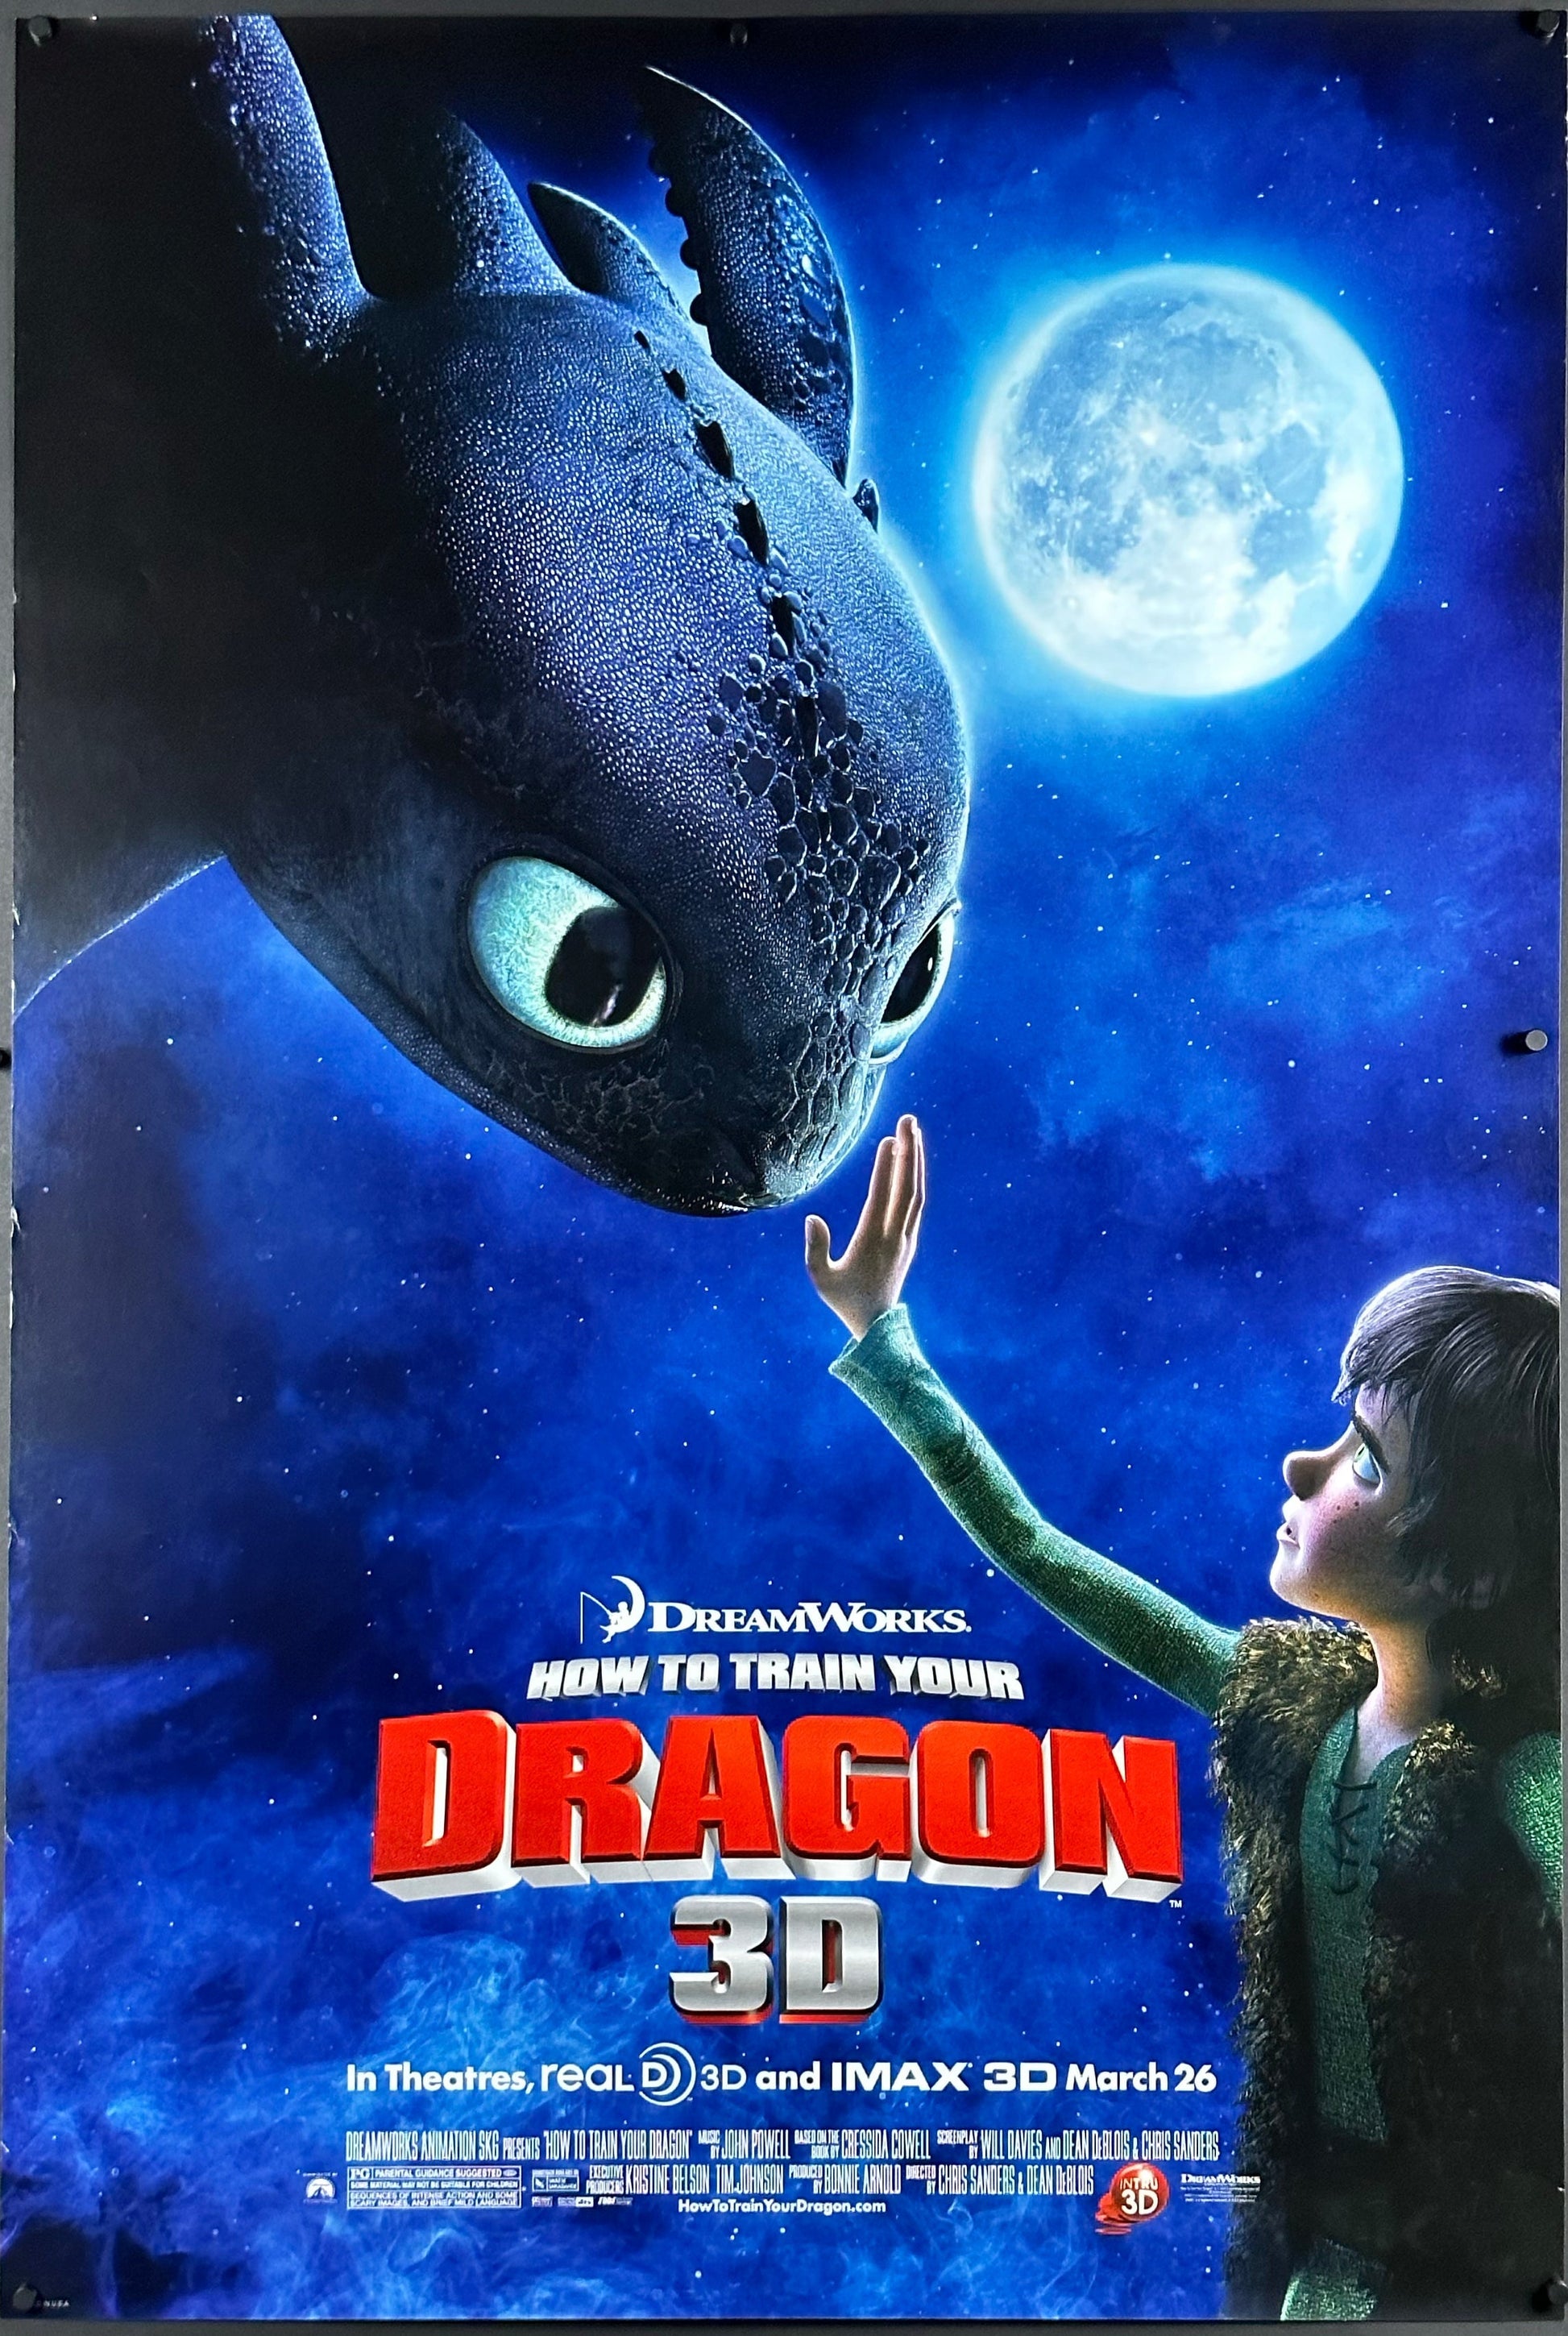 How To Train Your Dragon US One Sheet "3D" Style (2010) - ORIGINAL RELEASE - posterpalace.com